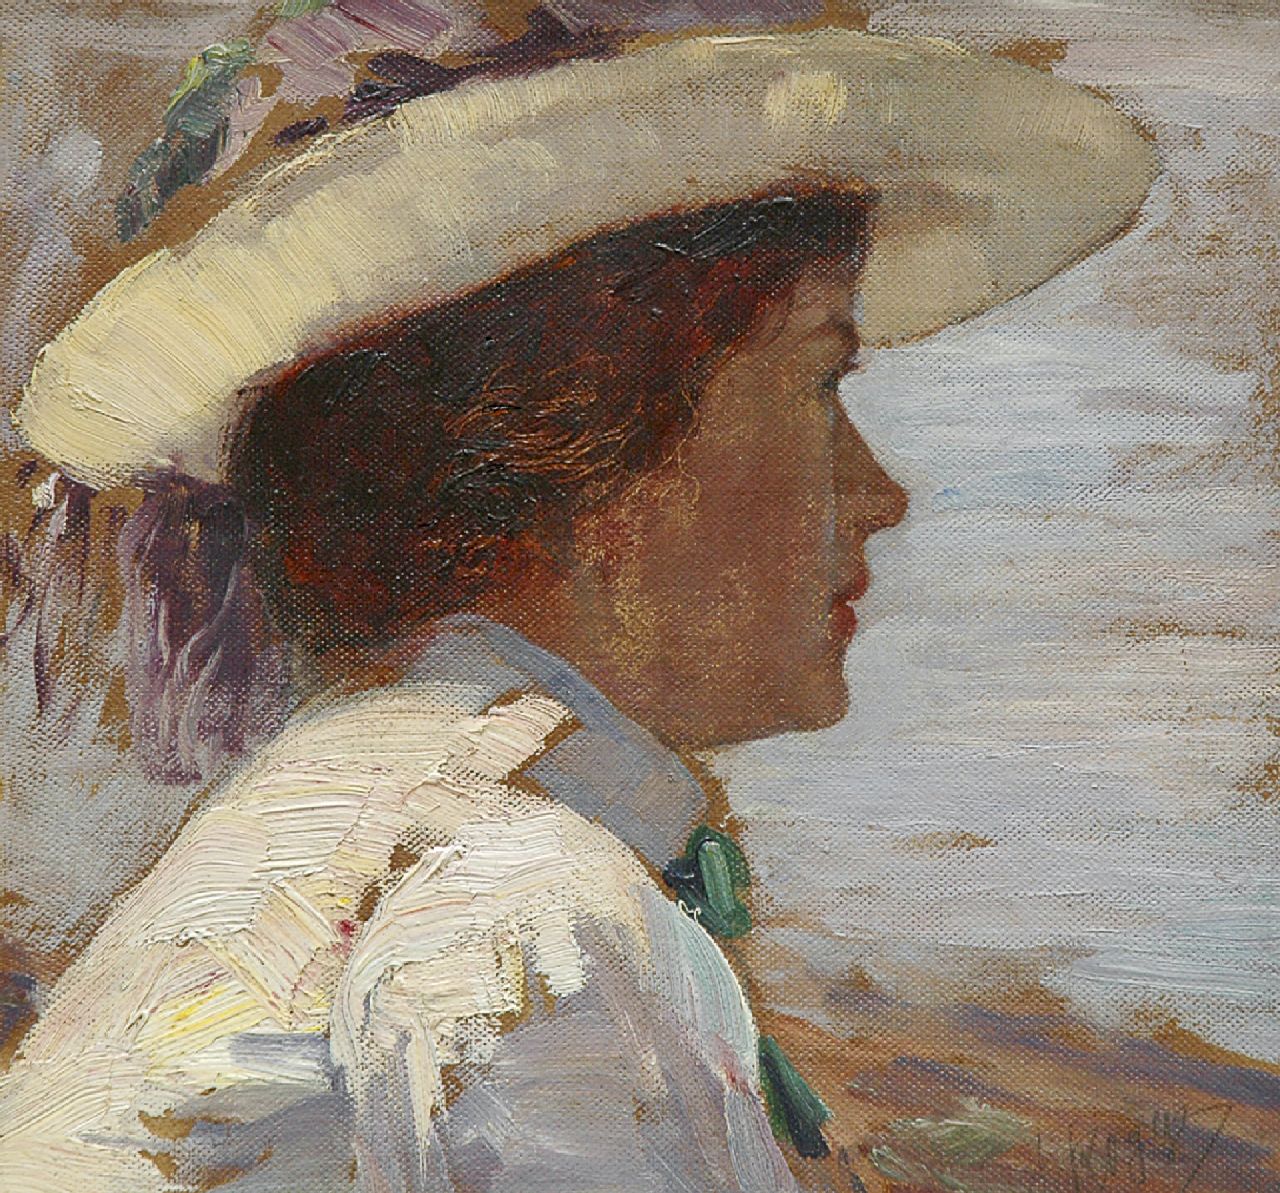 Rogge A.  | Adalbert Rogge, Lady with hat looking out over the sea, Öl auf Holzfaser 23,9 x 25,0 cm, signed l.r.